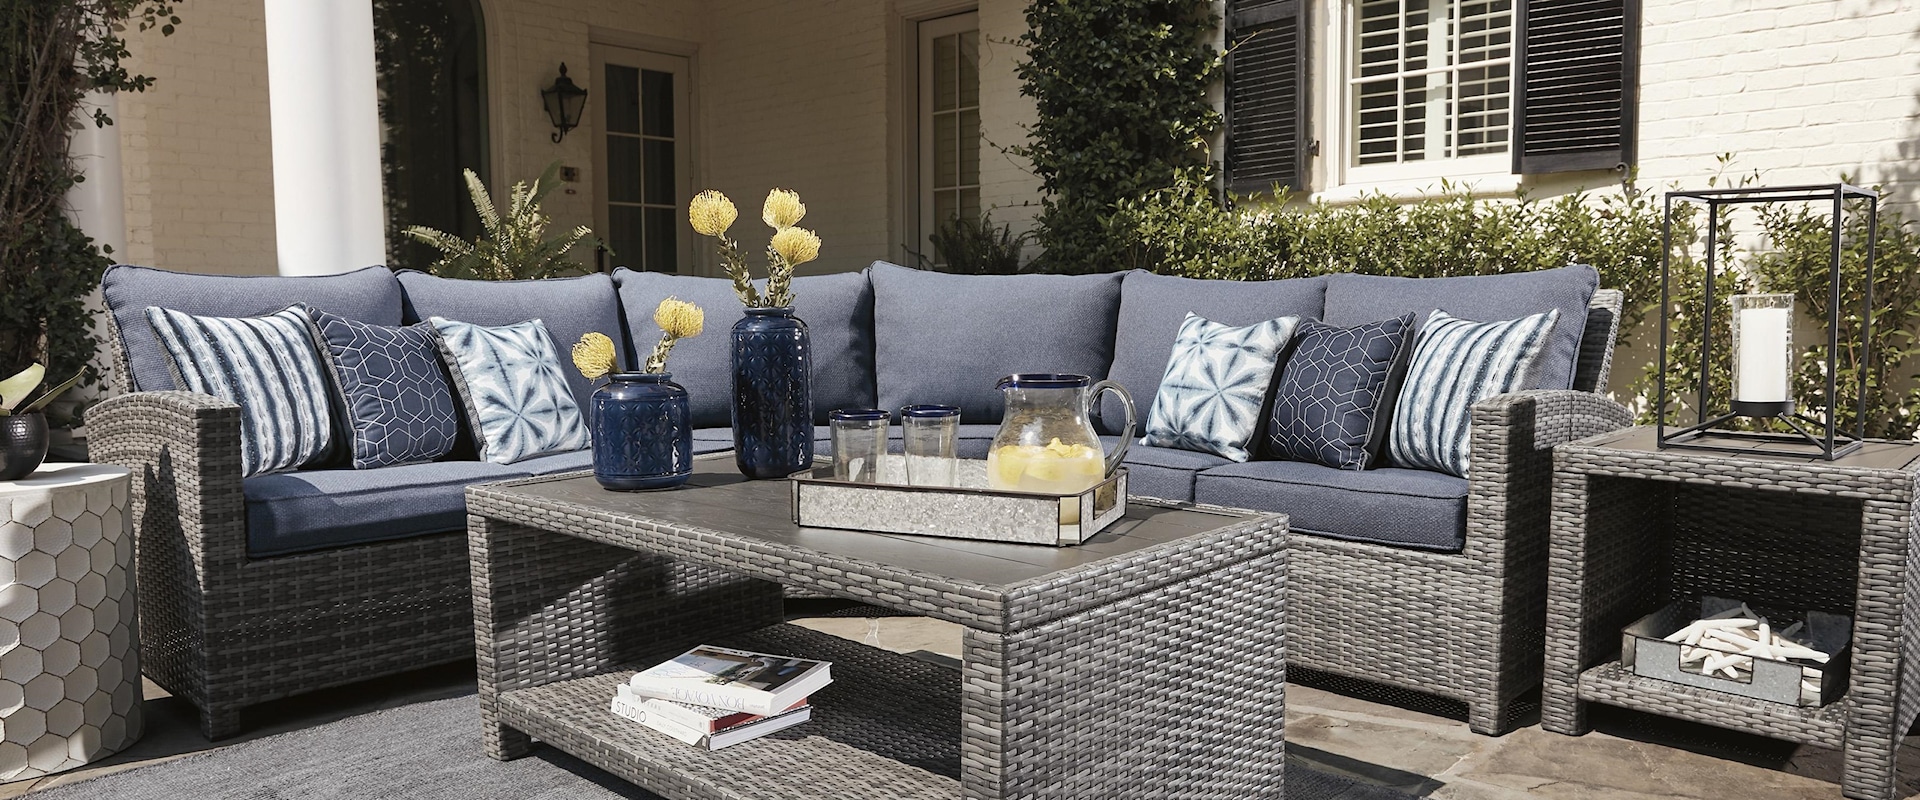 Outdoor 3 Piece Sectional Group